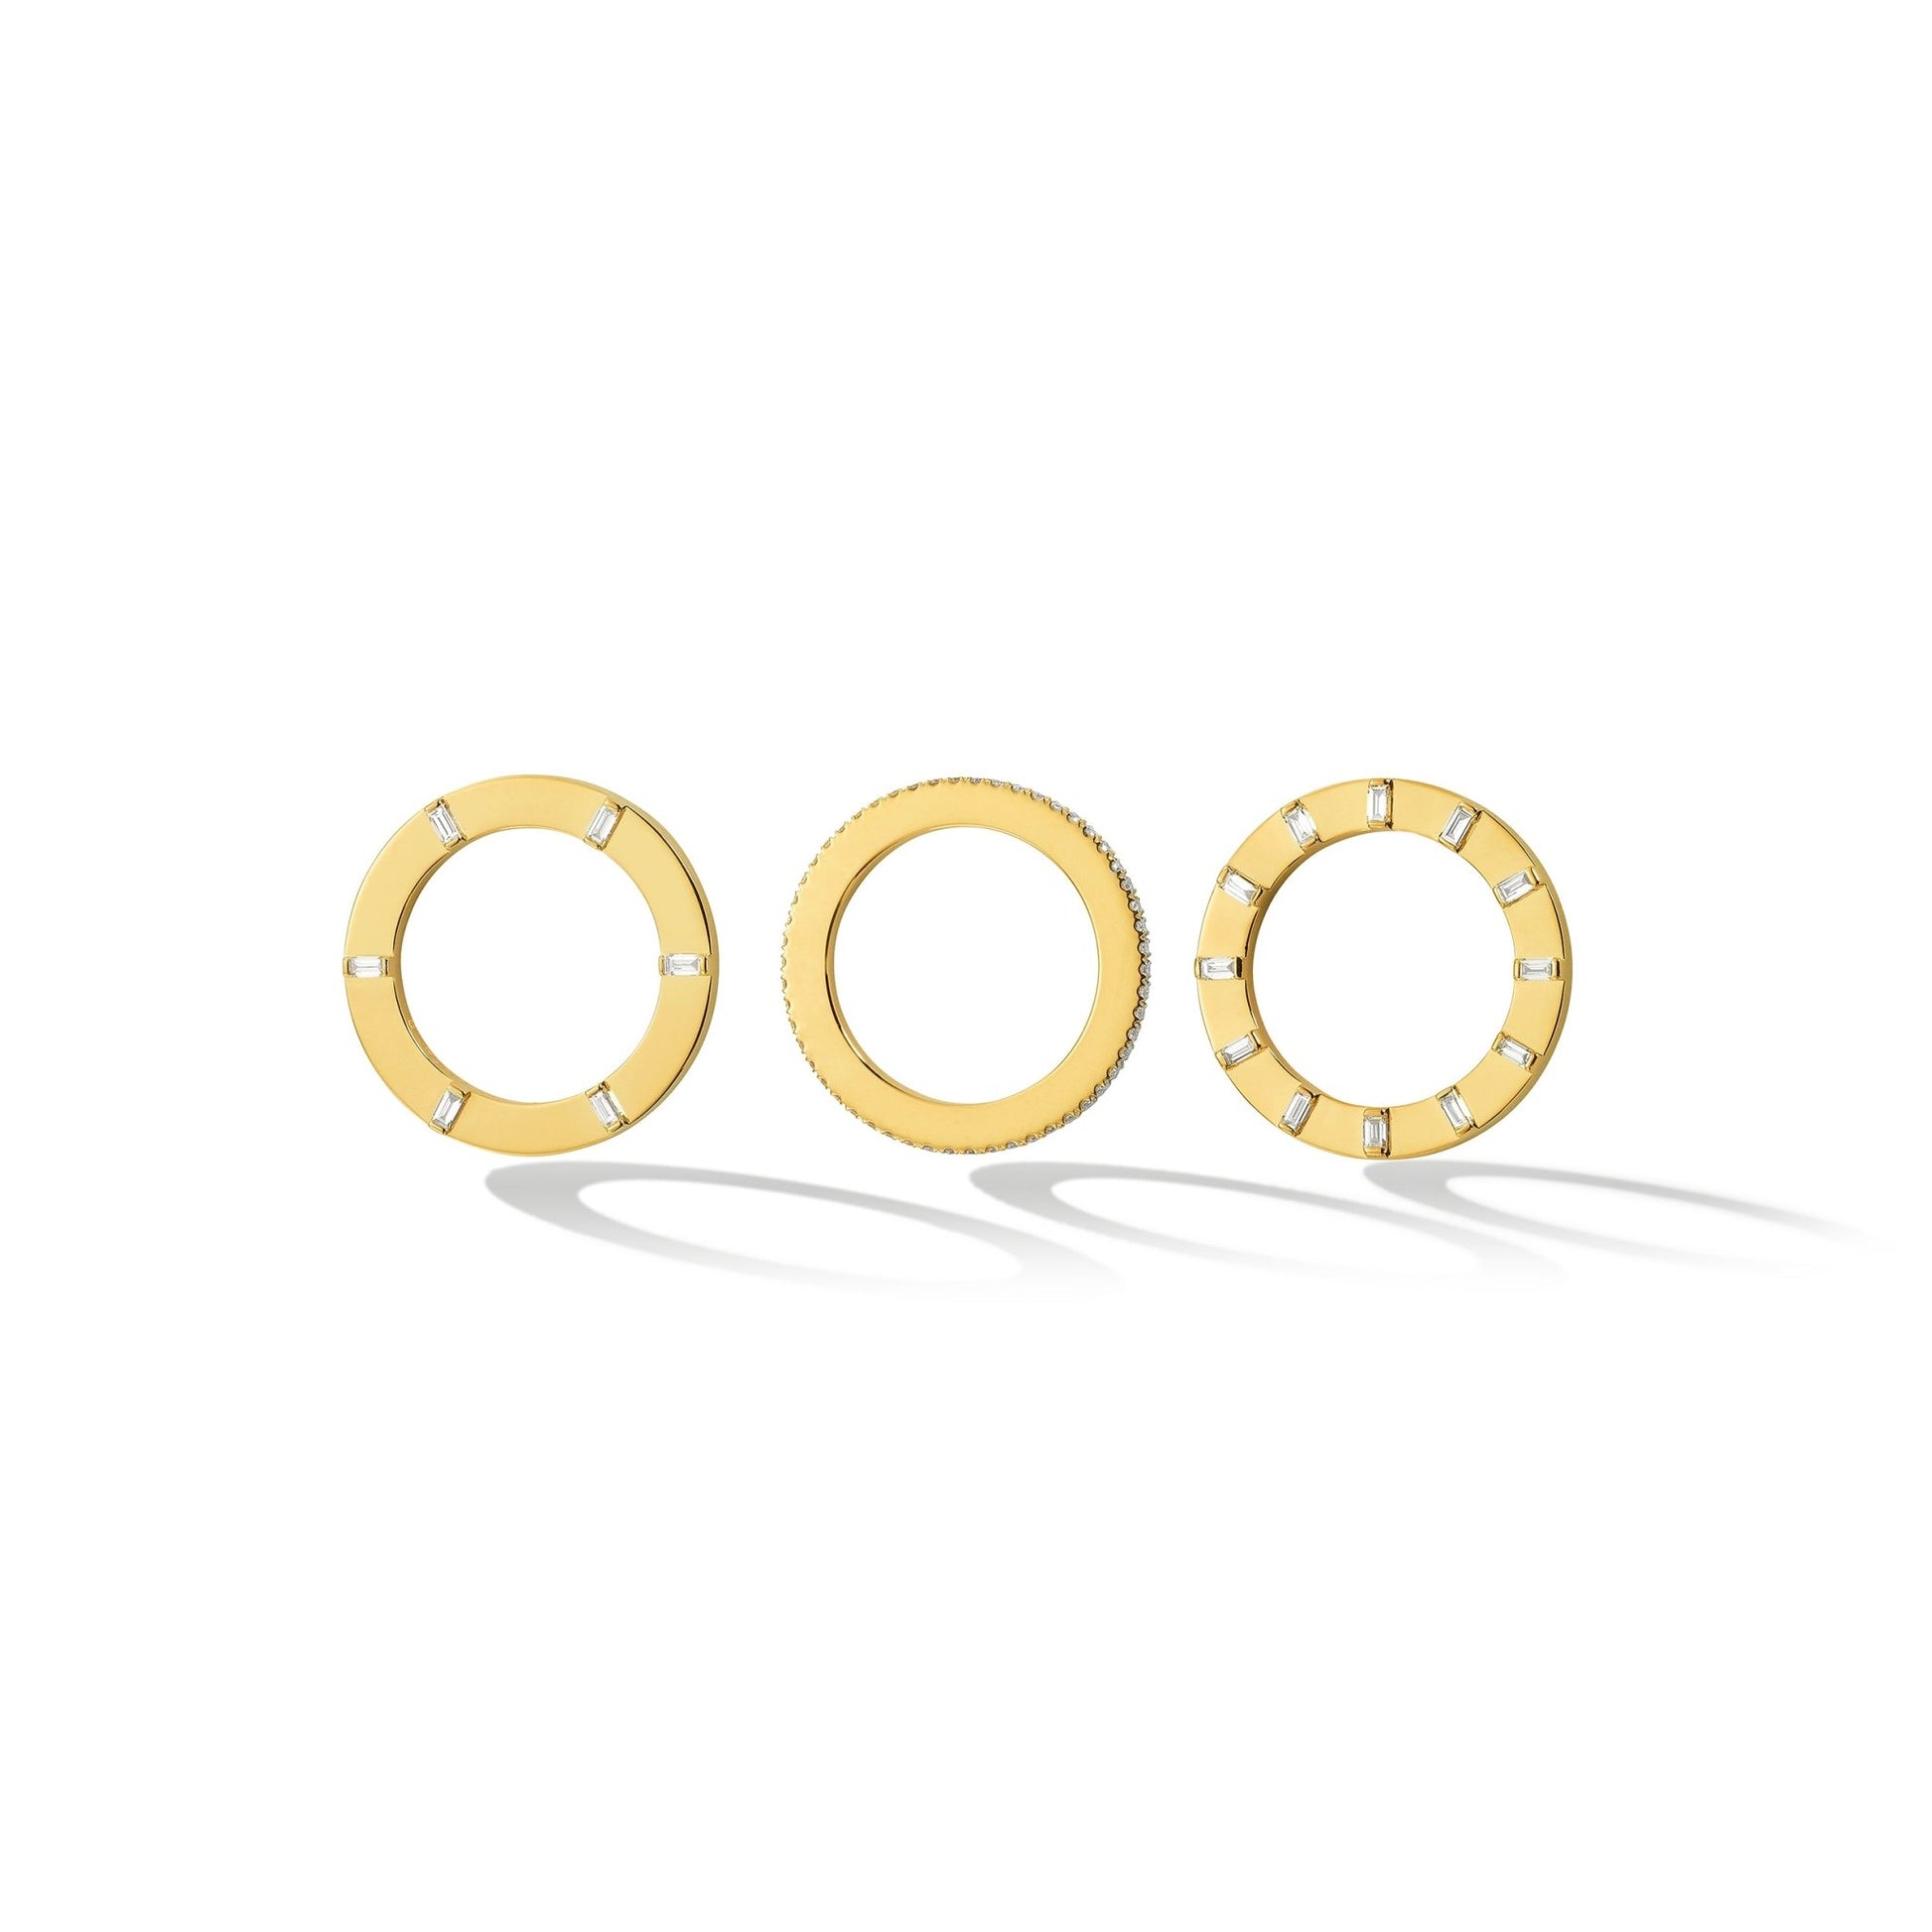 Yellow Gold Solo Stackable Ring with White Diamonds - Cadar